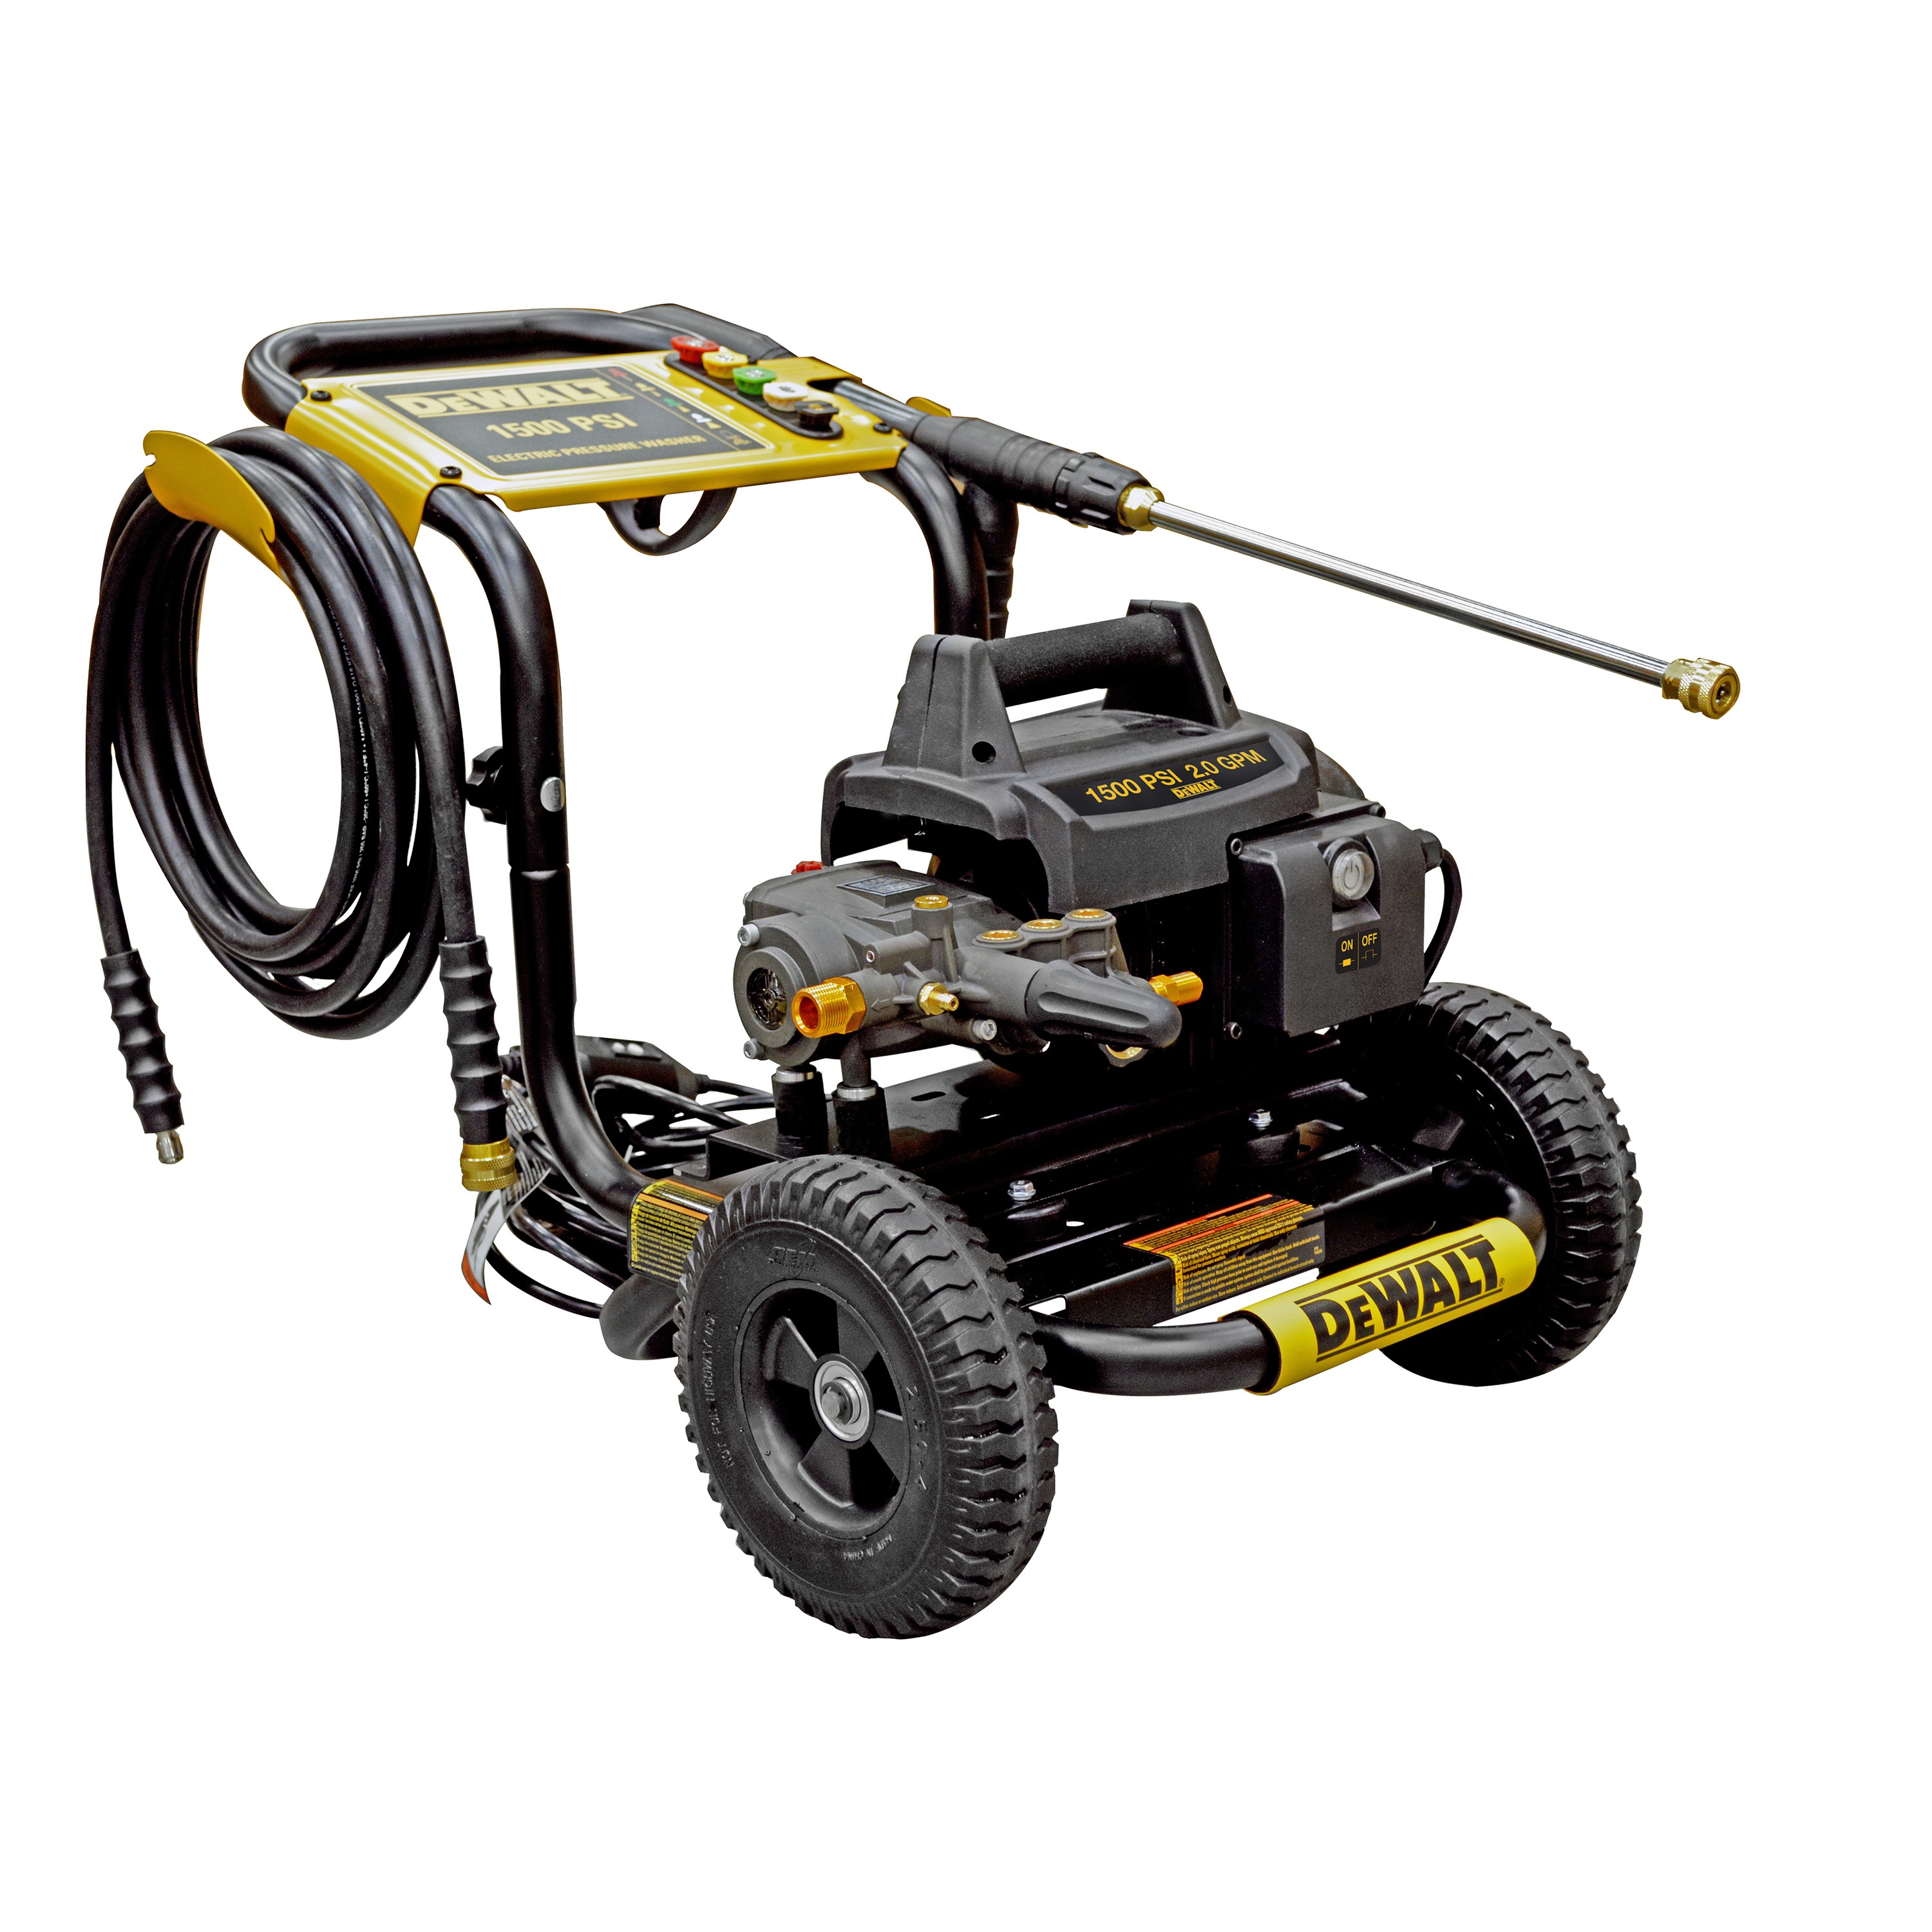 DEWALT - 1500 PSI at 20 GPM Cold Water Electric Pressure Washer - DXPW1500E